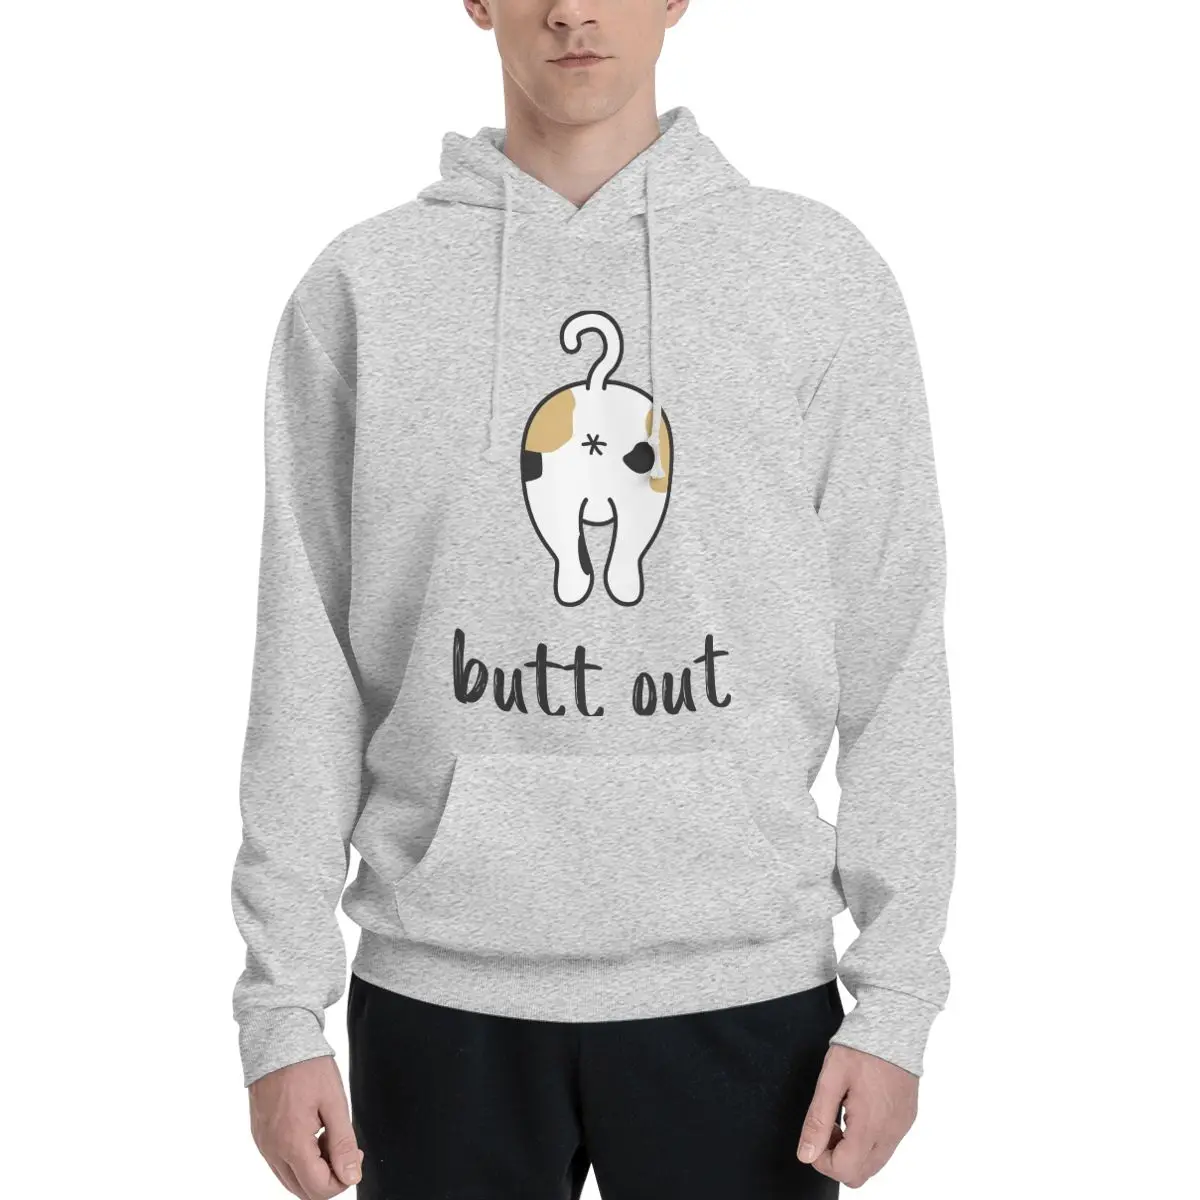 

Cat Butthole Butt Out Polyester Hoodie Men's sweatershirt Warm Dif Colors Sizes